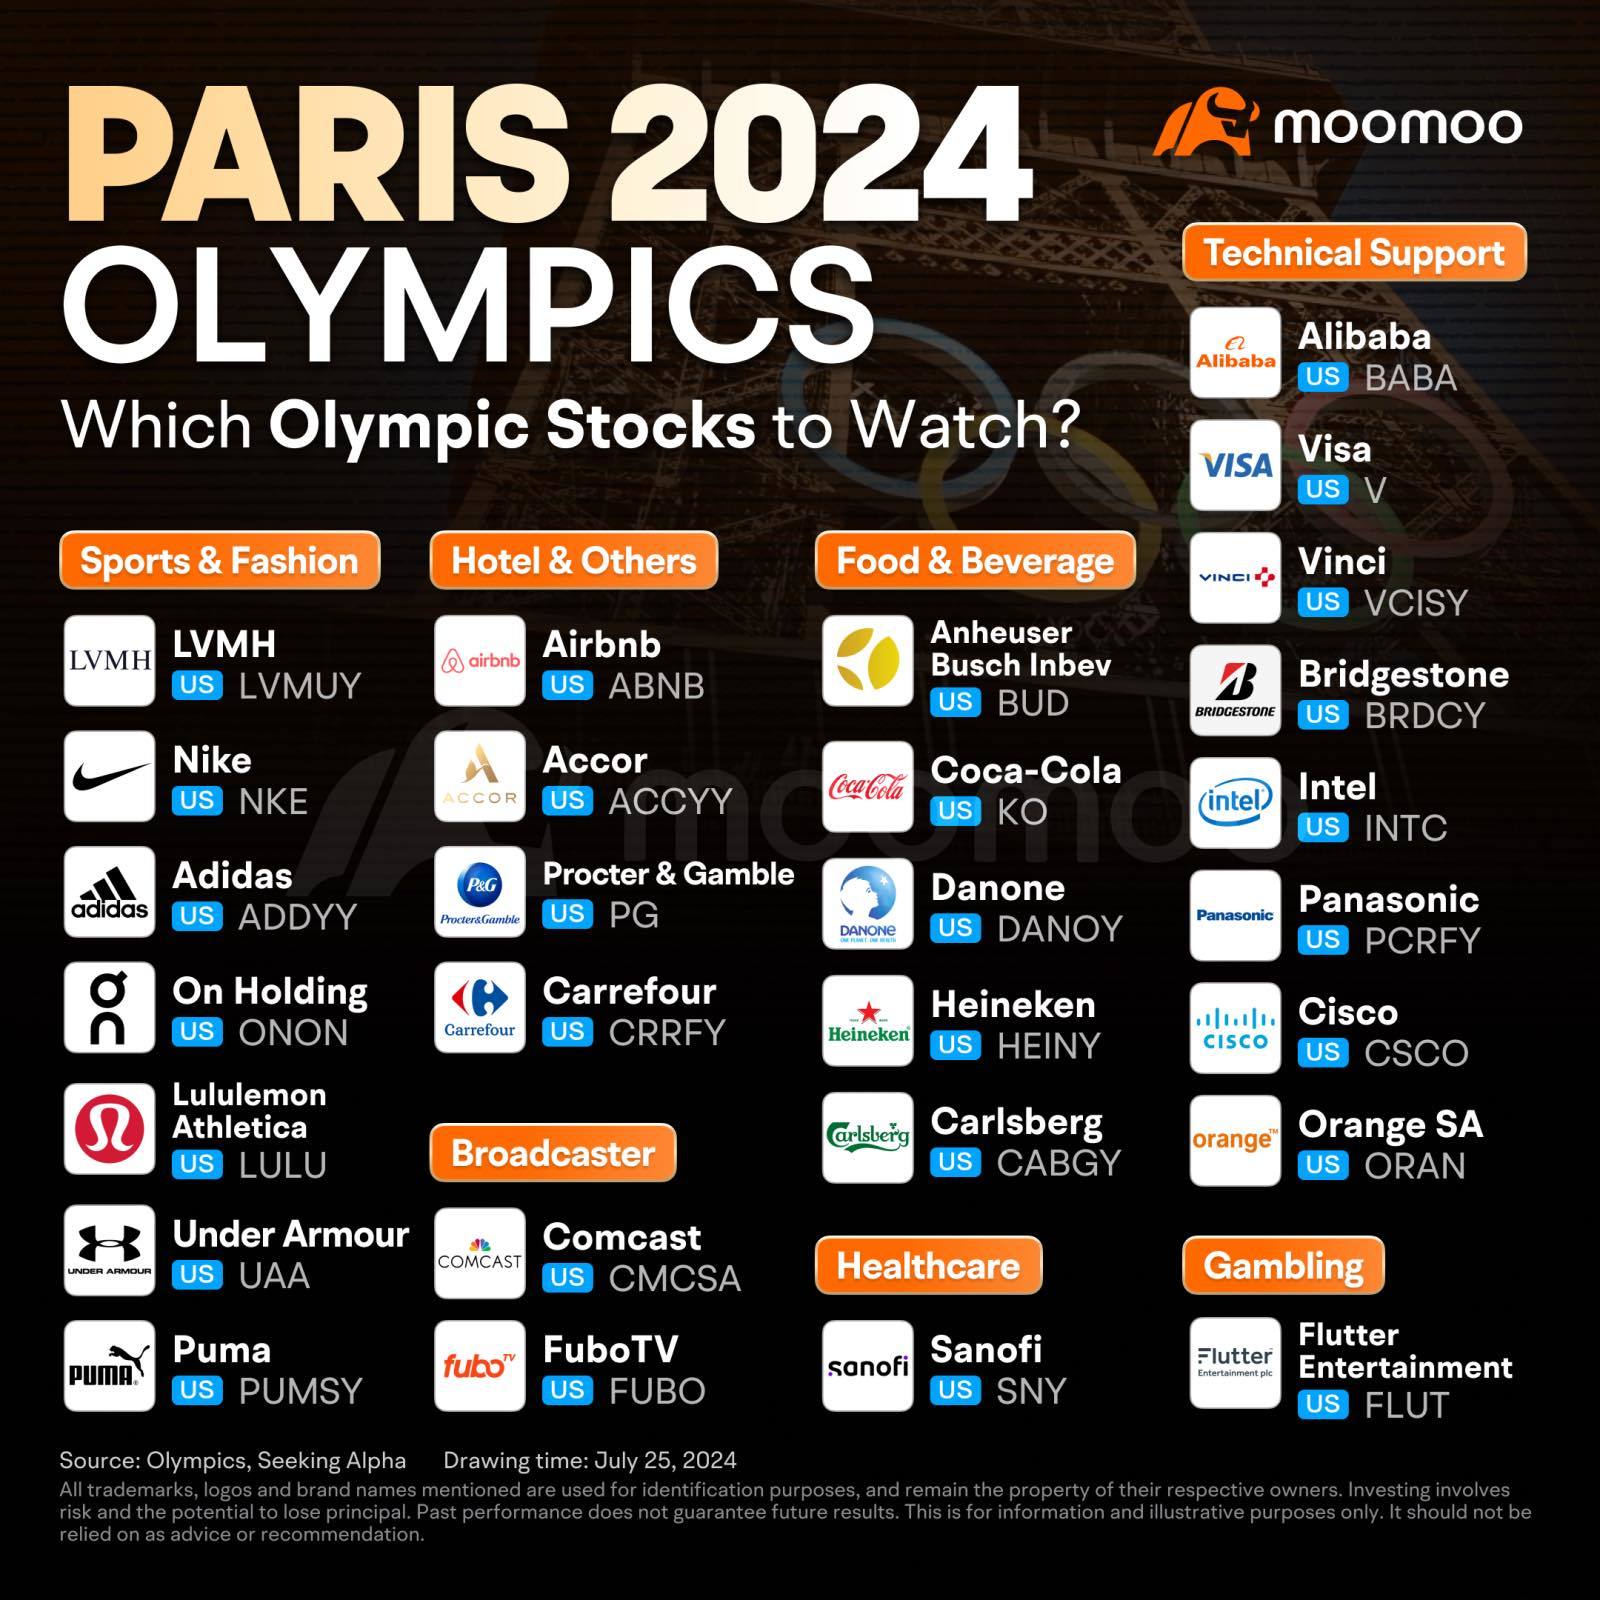 Potential stocks you can look up for Paris 2024 Olympics